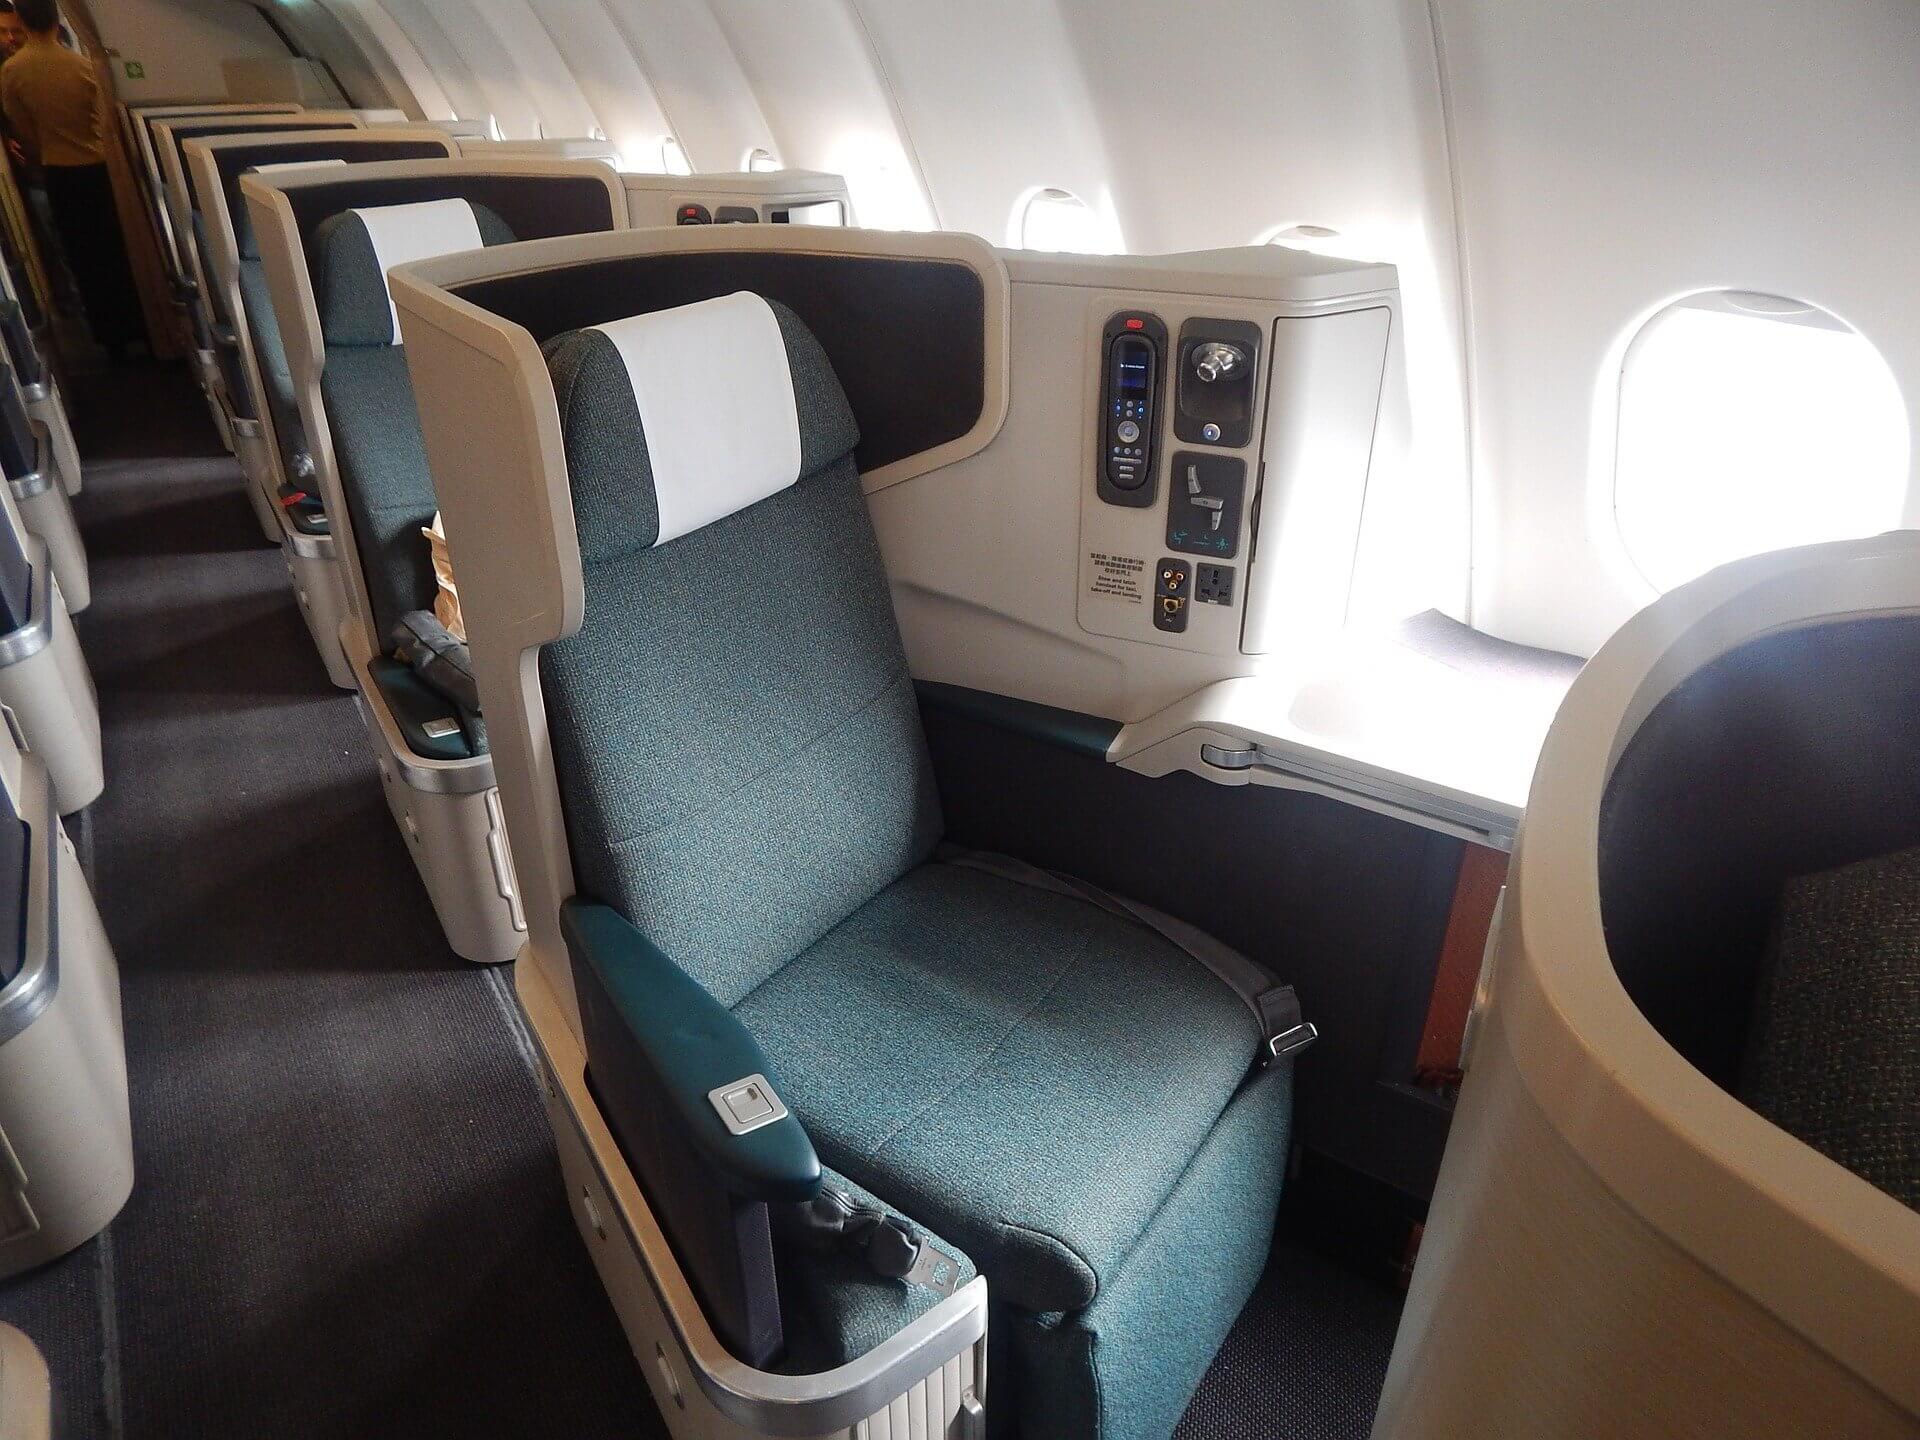 Business Seat on airplane